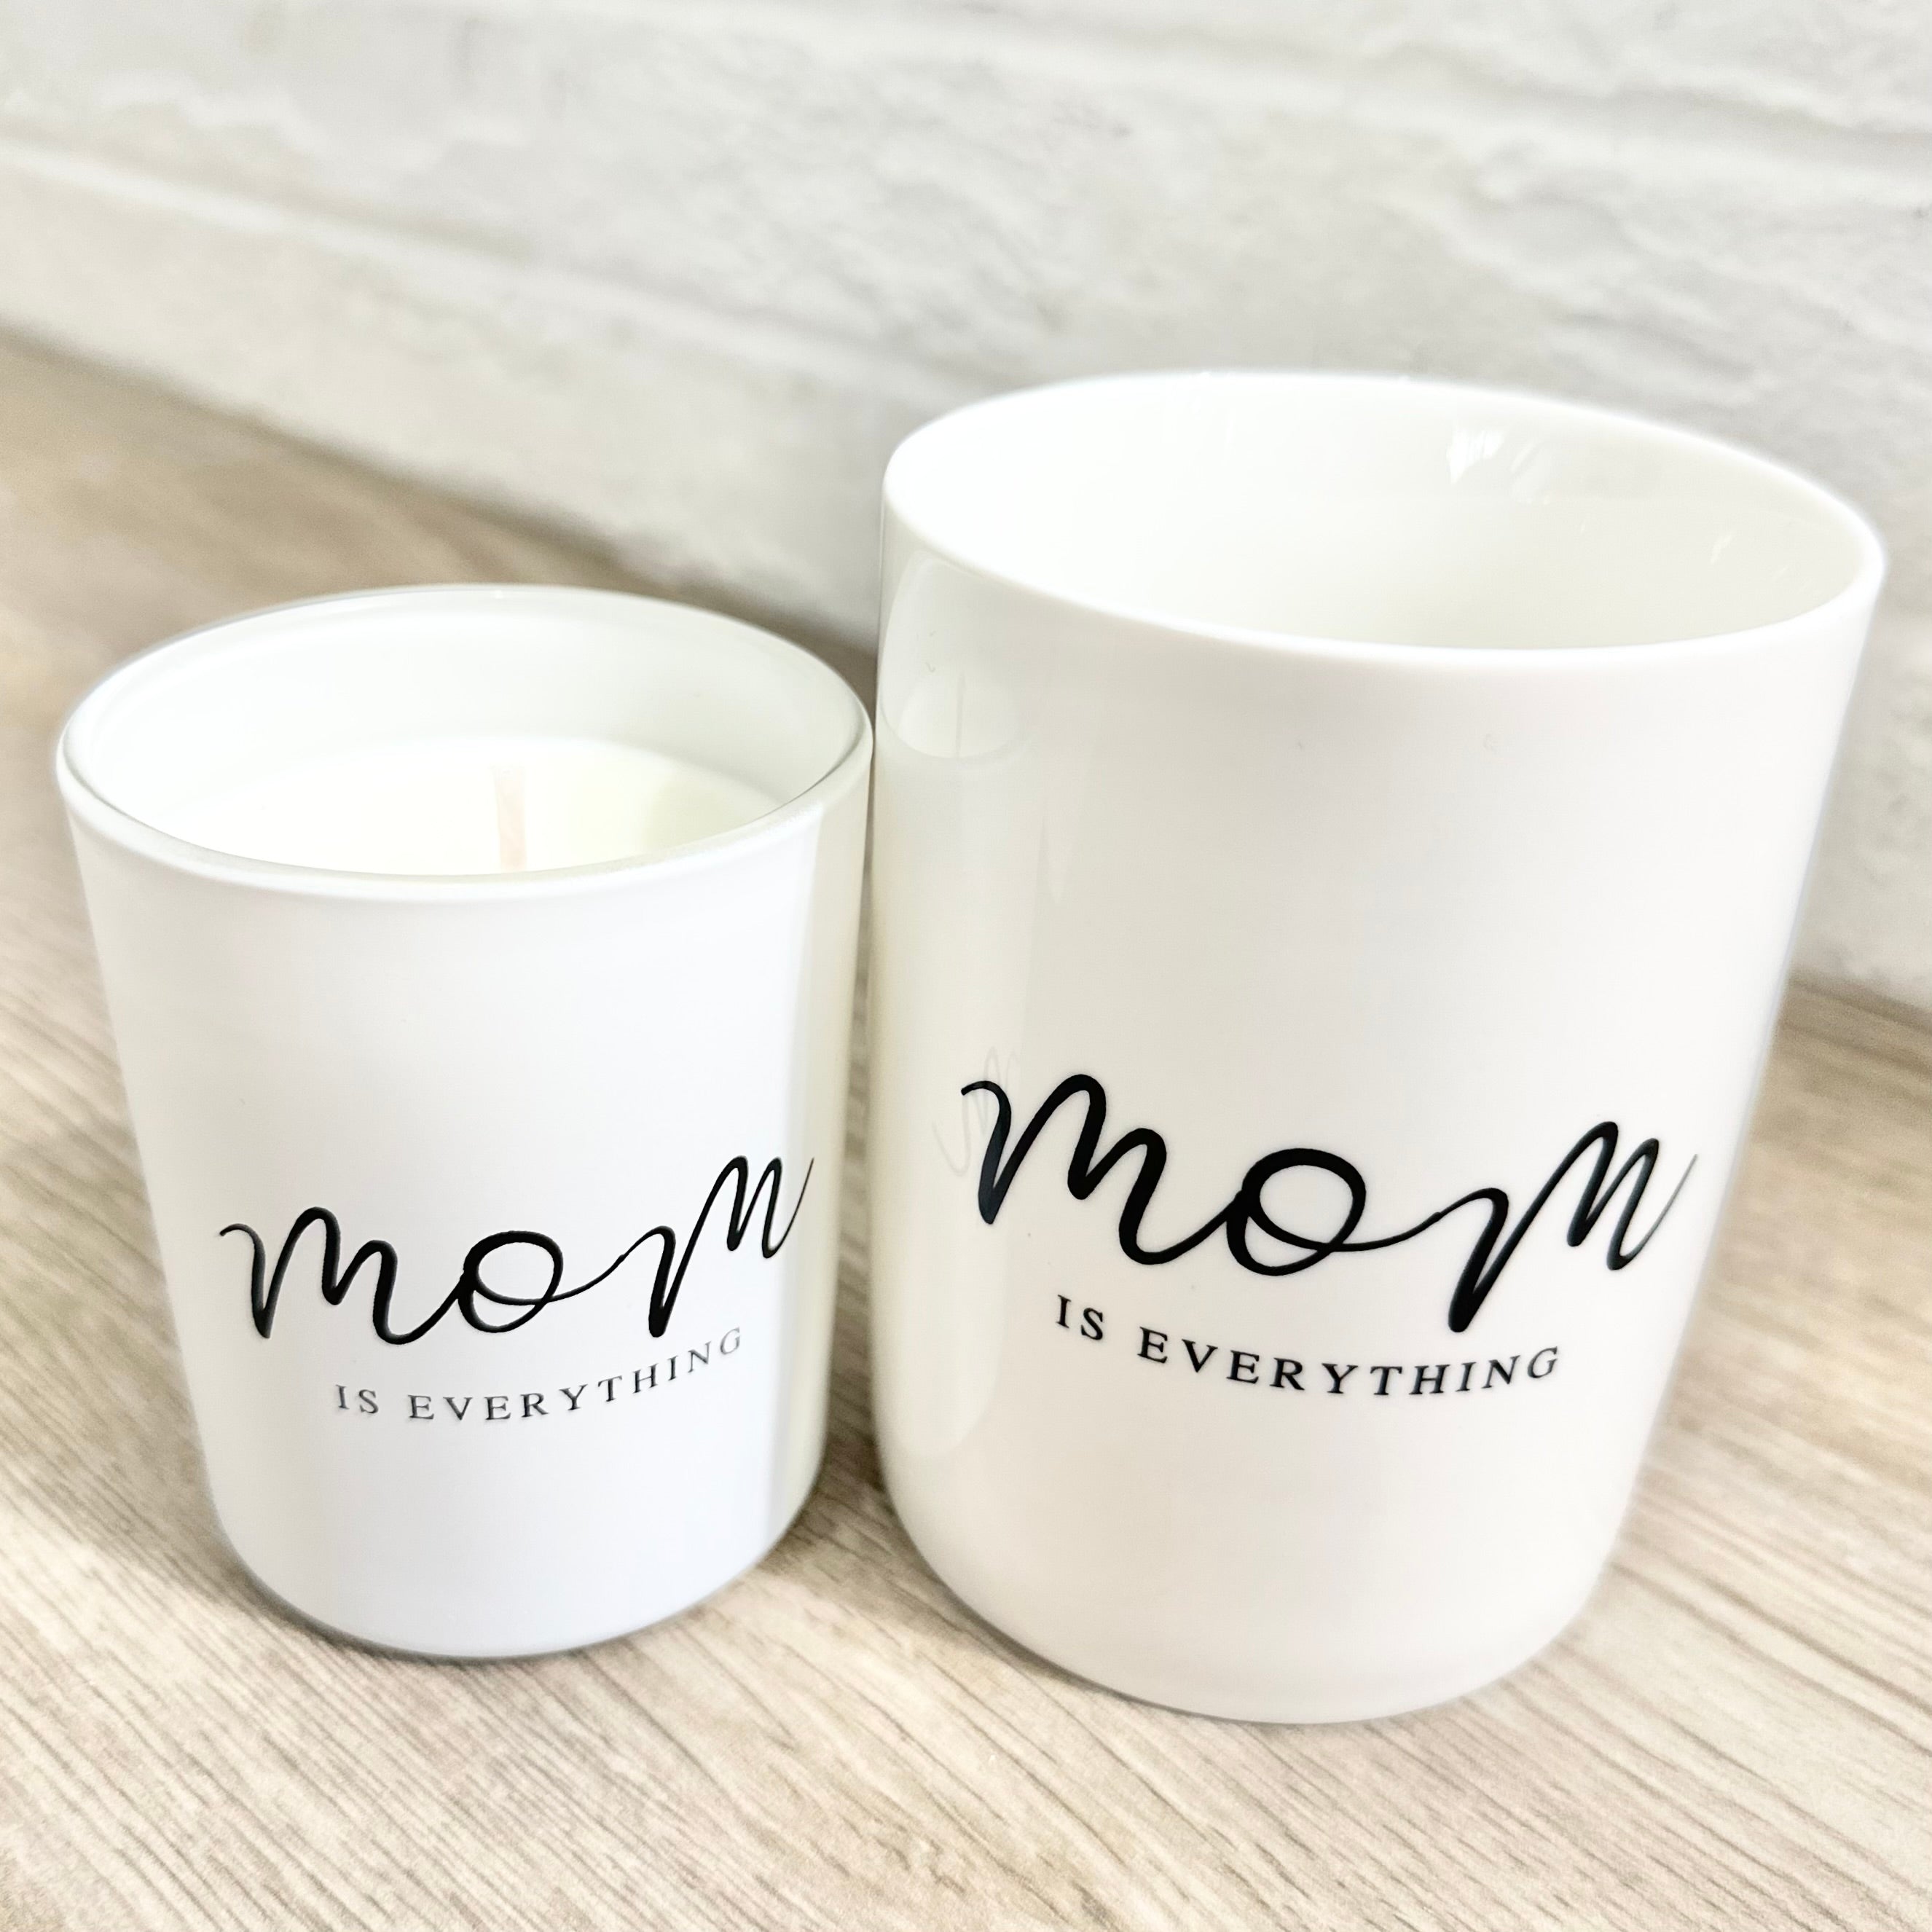 Thoughtful Gift for Mother with quote "Mom is Everything"